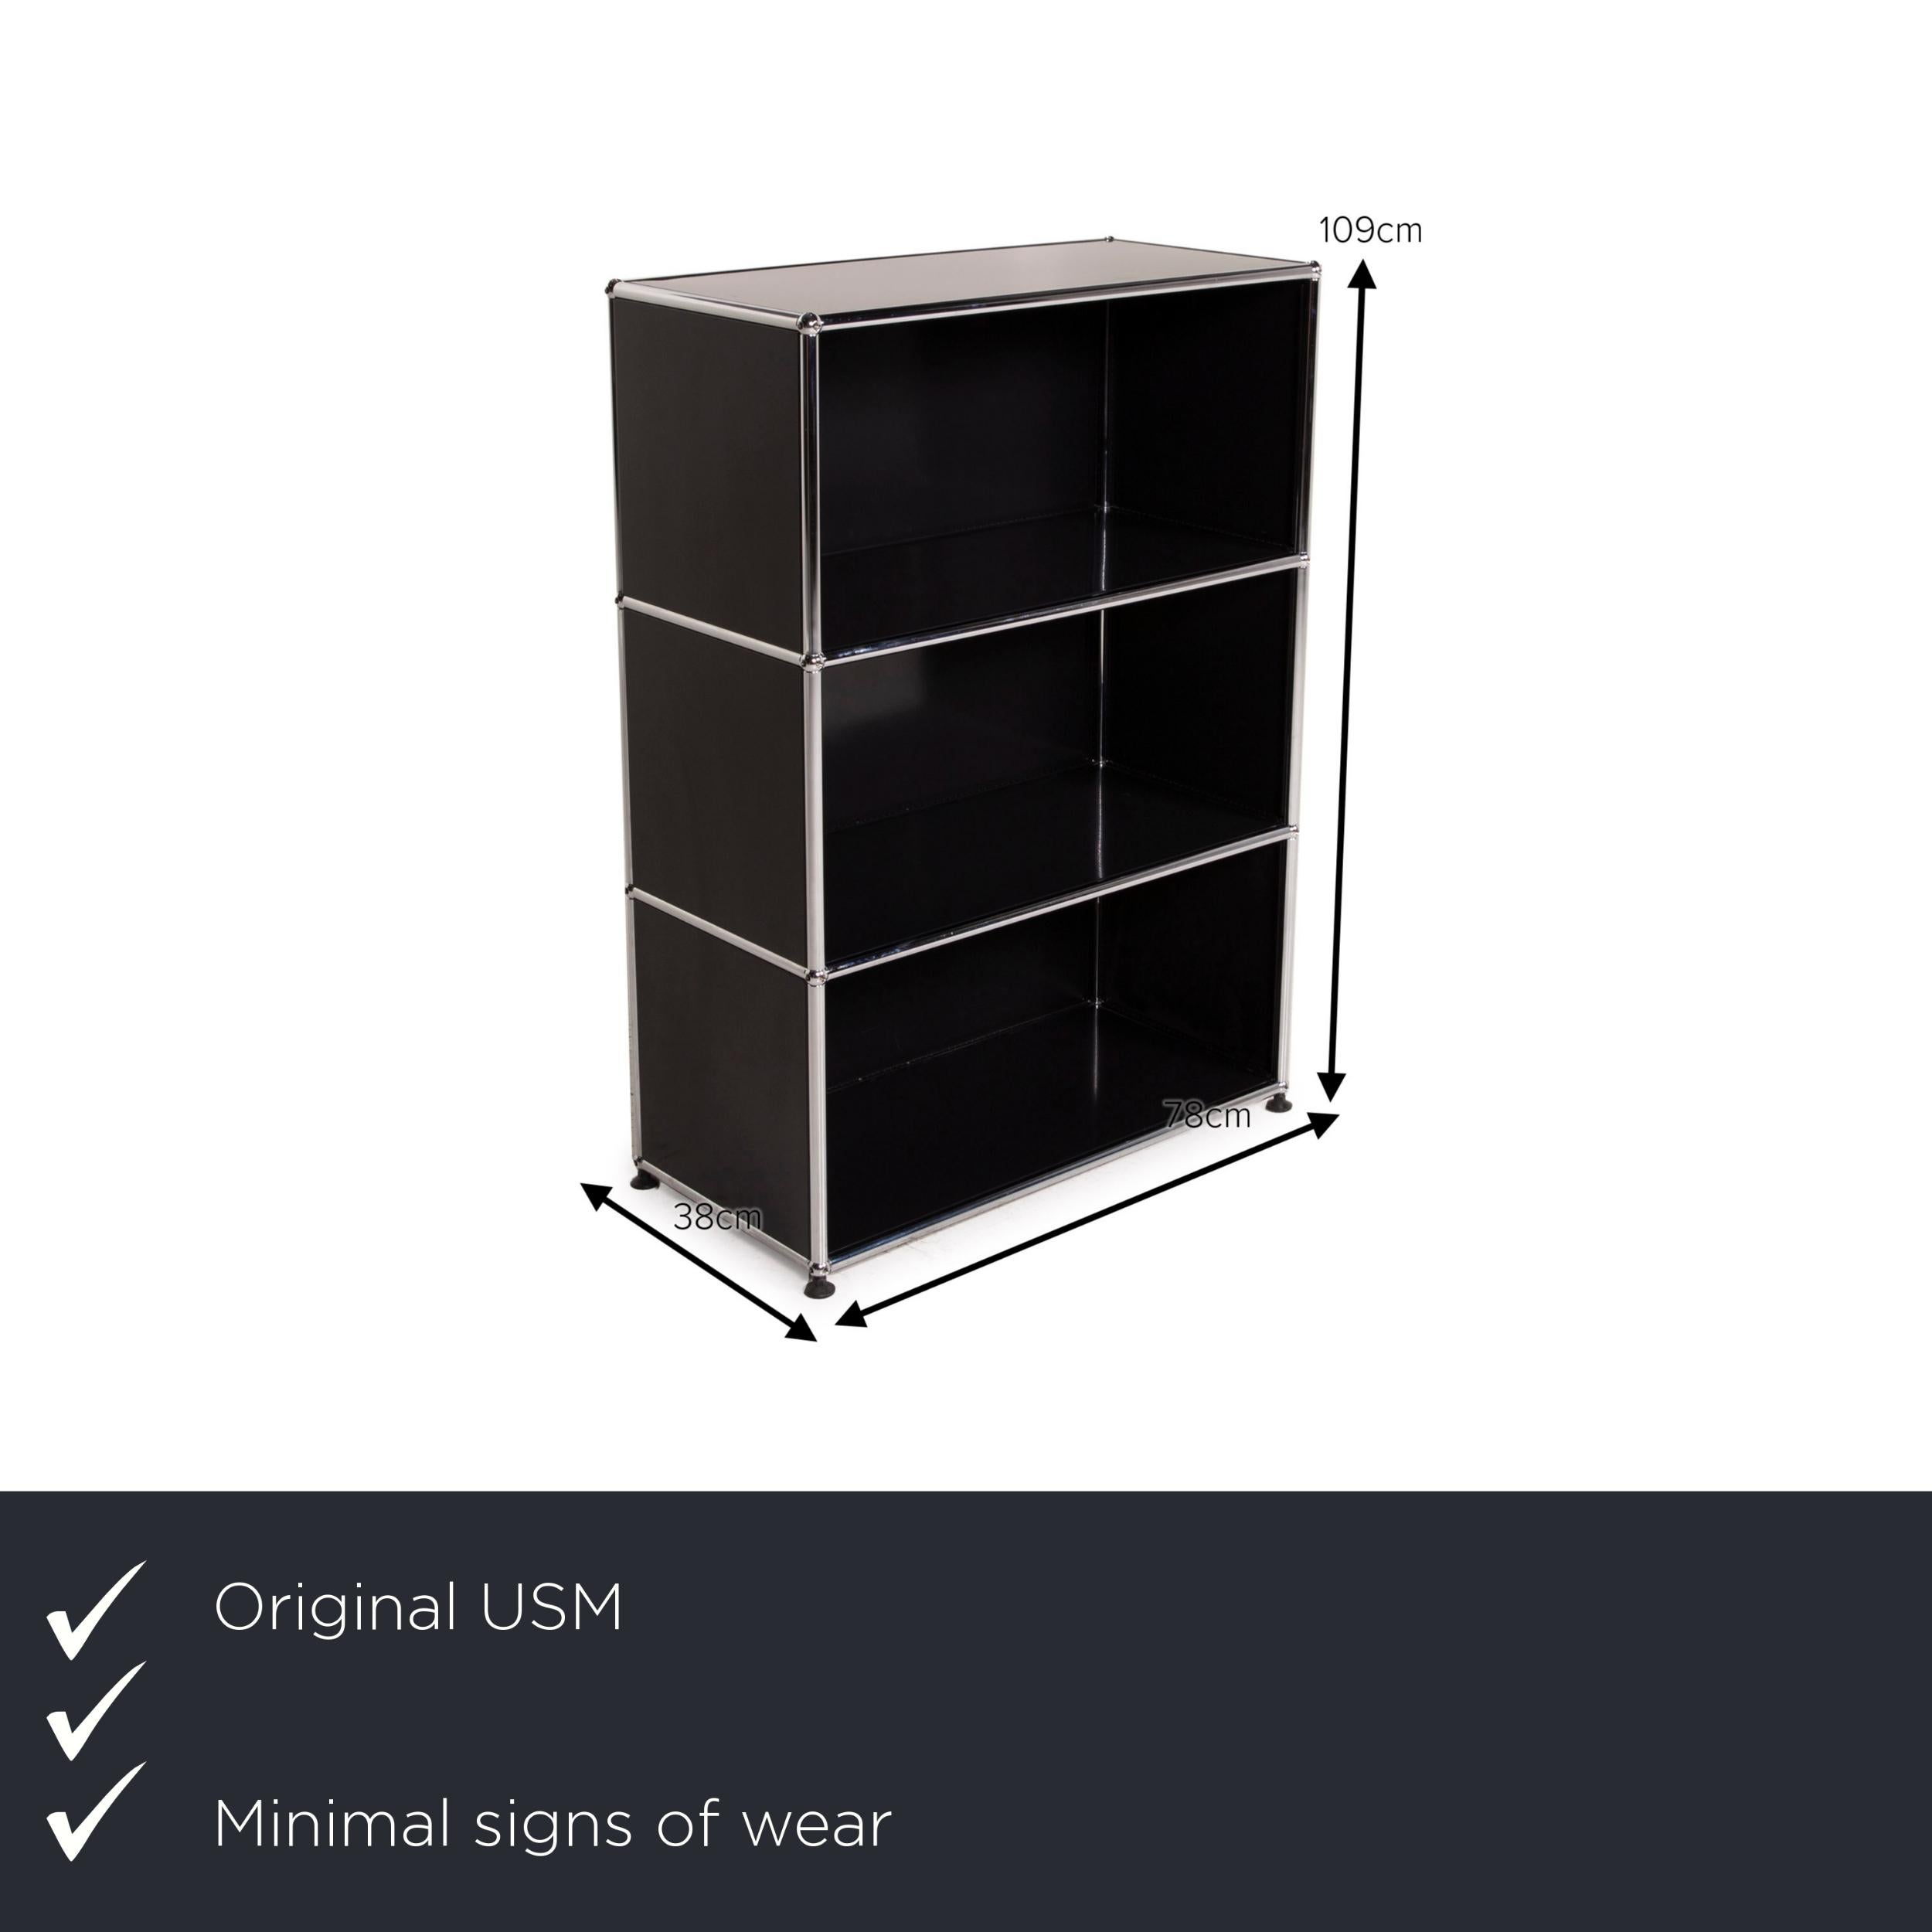 We present to you an USM Haller metal sideboard black 1x3 shelf compartment office.

 

 Product measurements in centimeters:
 

Depth: 38
Width: 78
Height: 109.




 